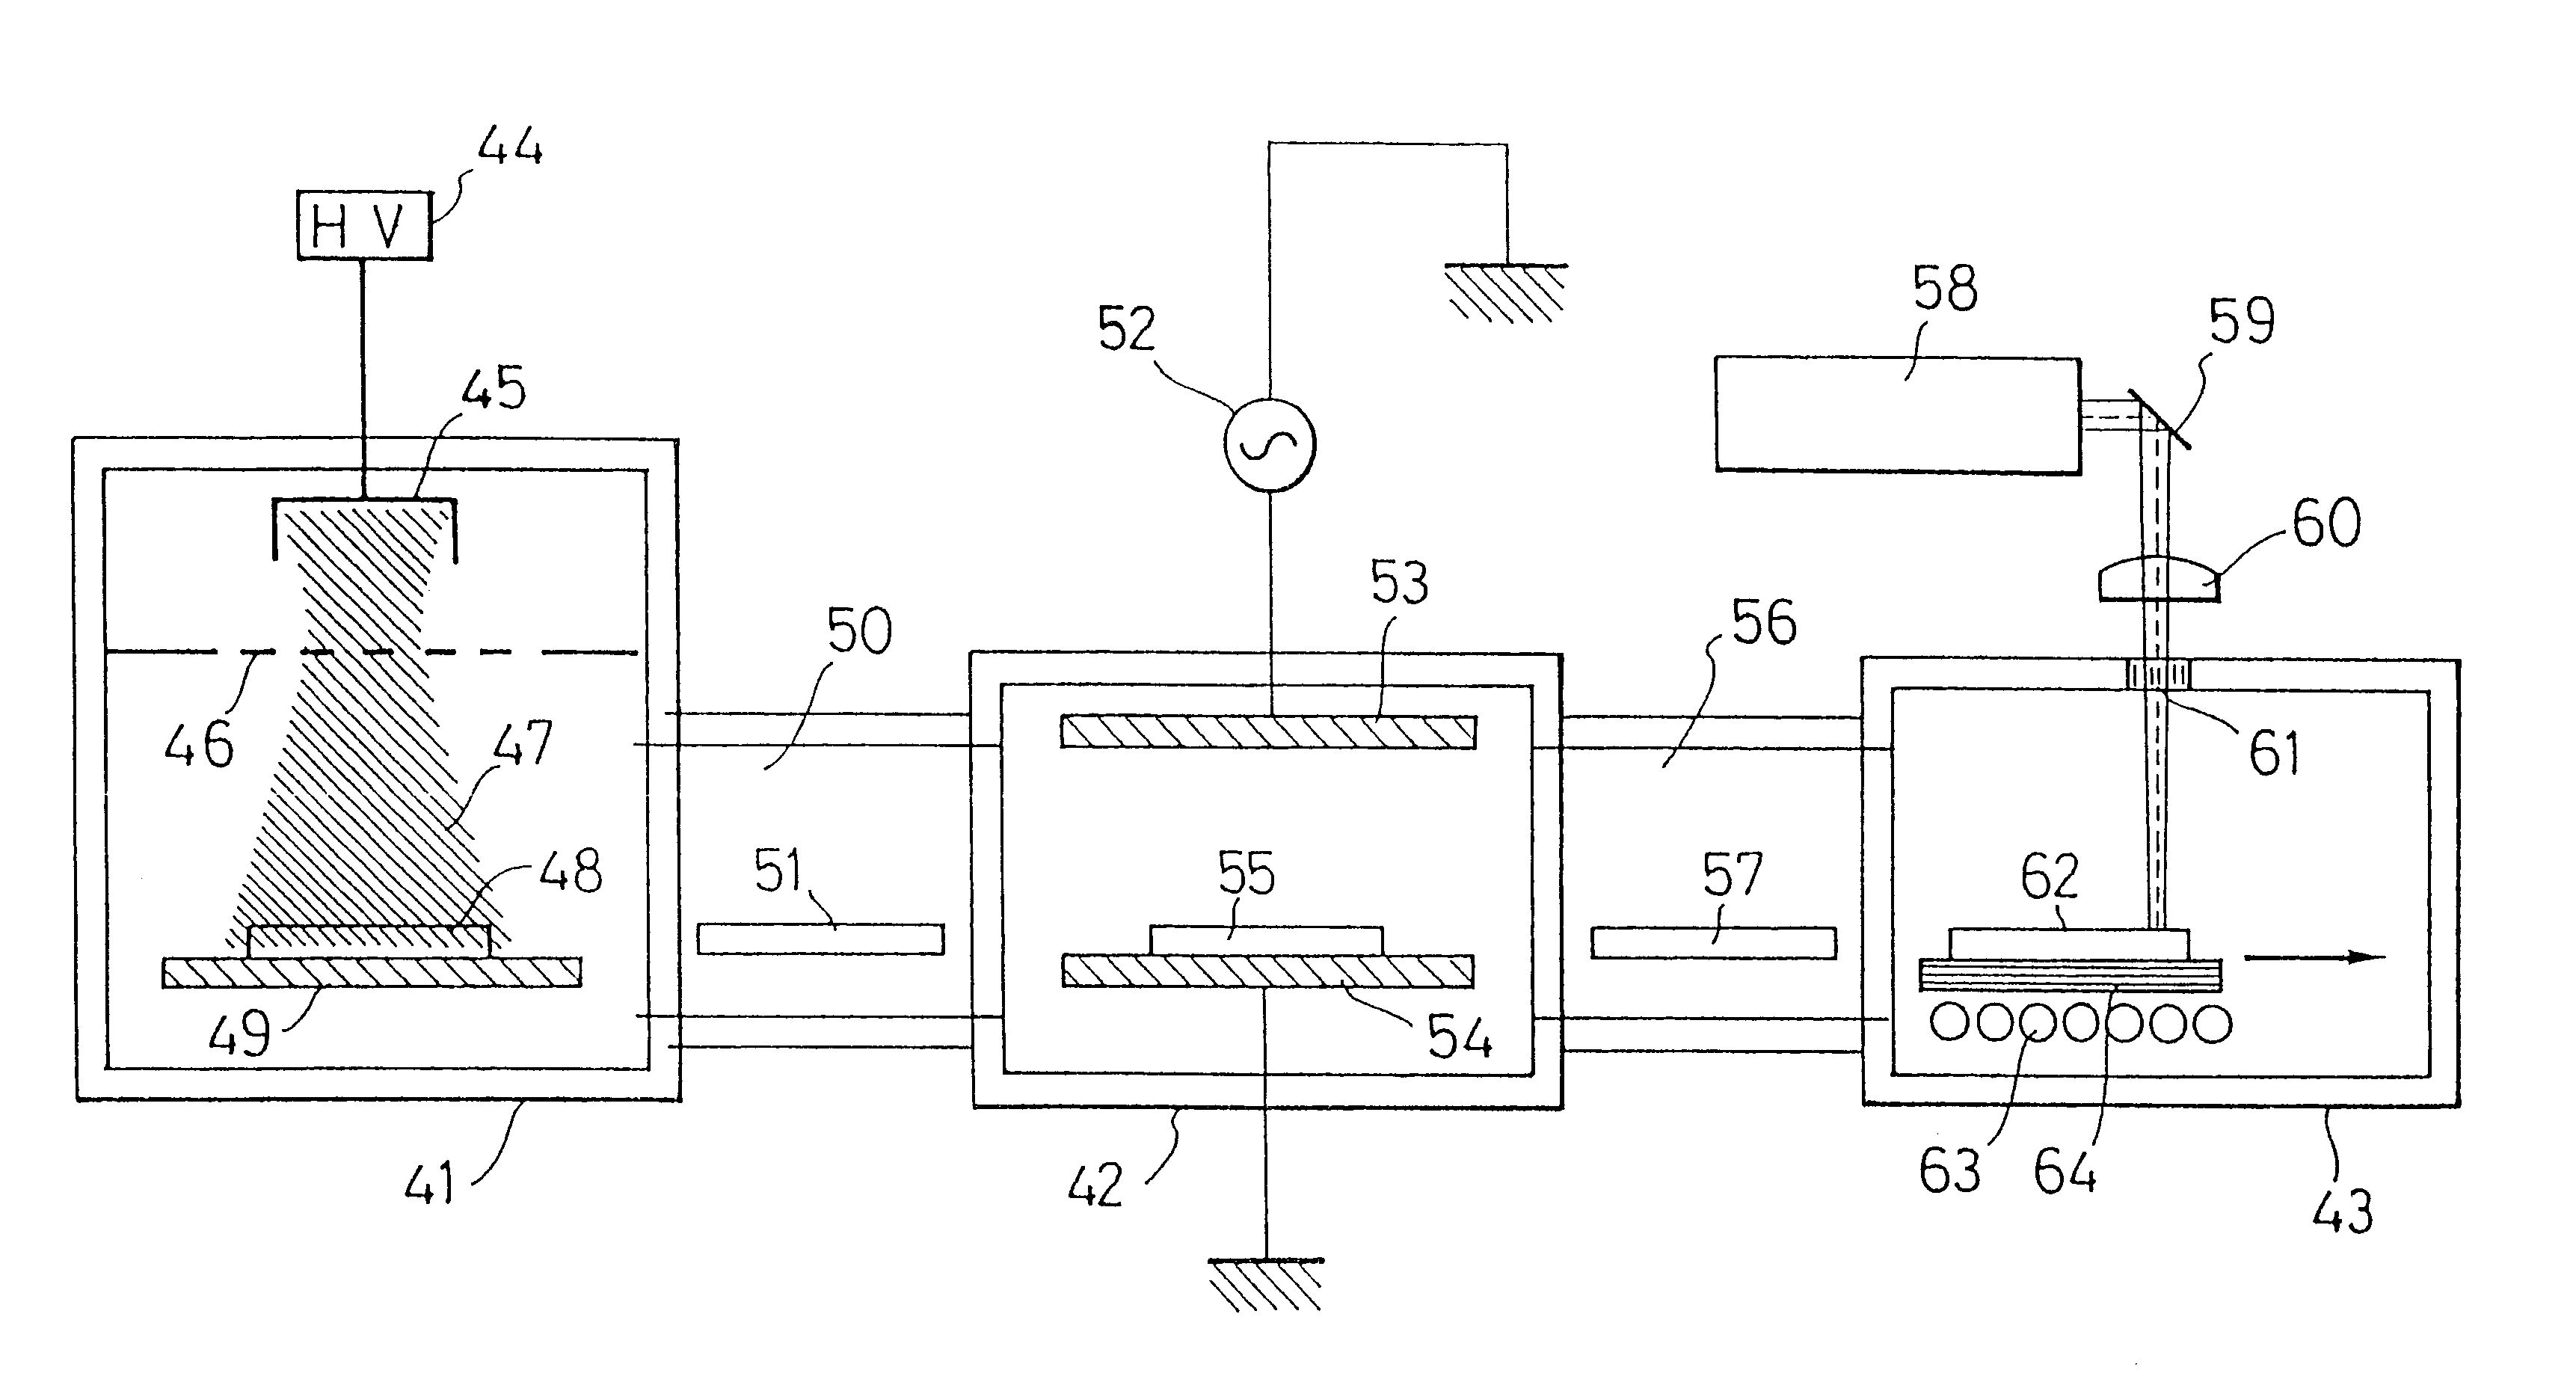 Apparatus for processing a semiconductor